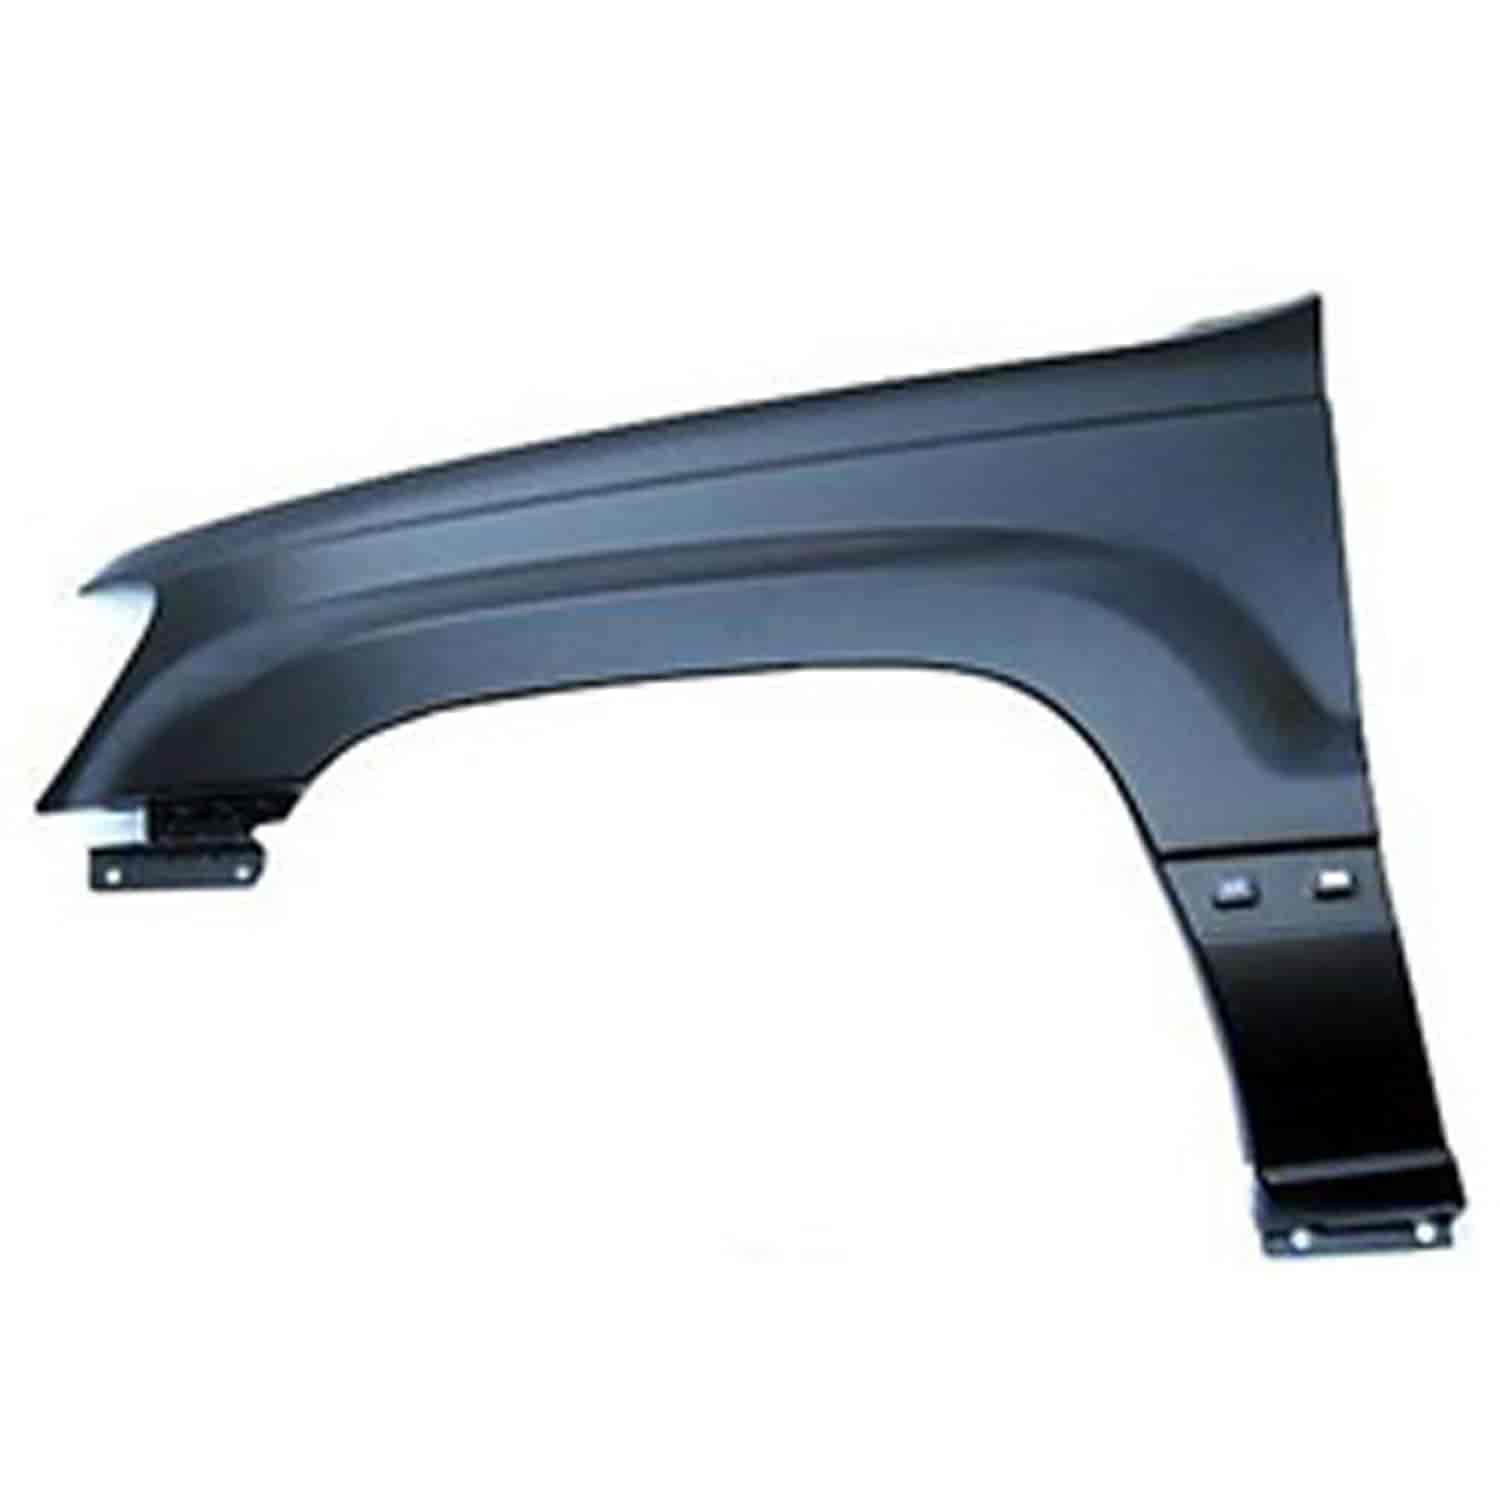 Replacement left front fender from Omix-ADA, Fits 99-04 Jeep Grand Cherokee WJ